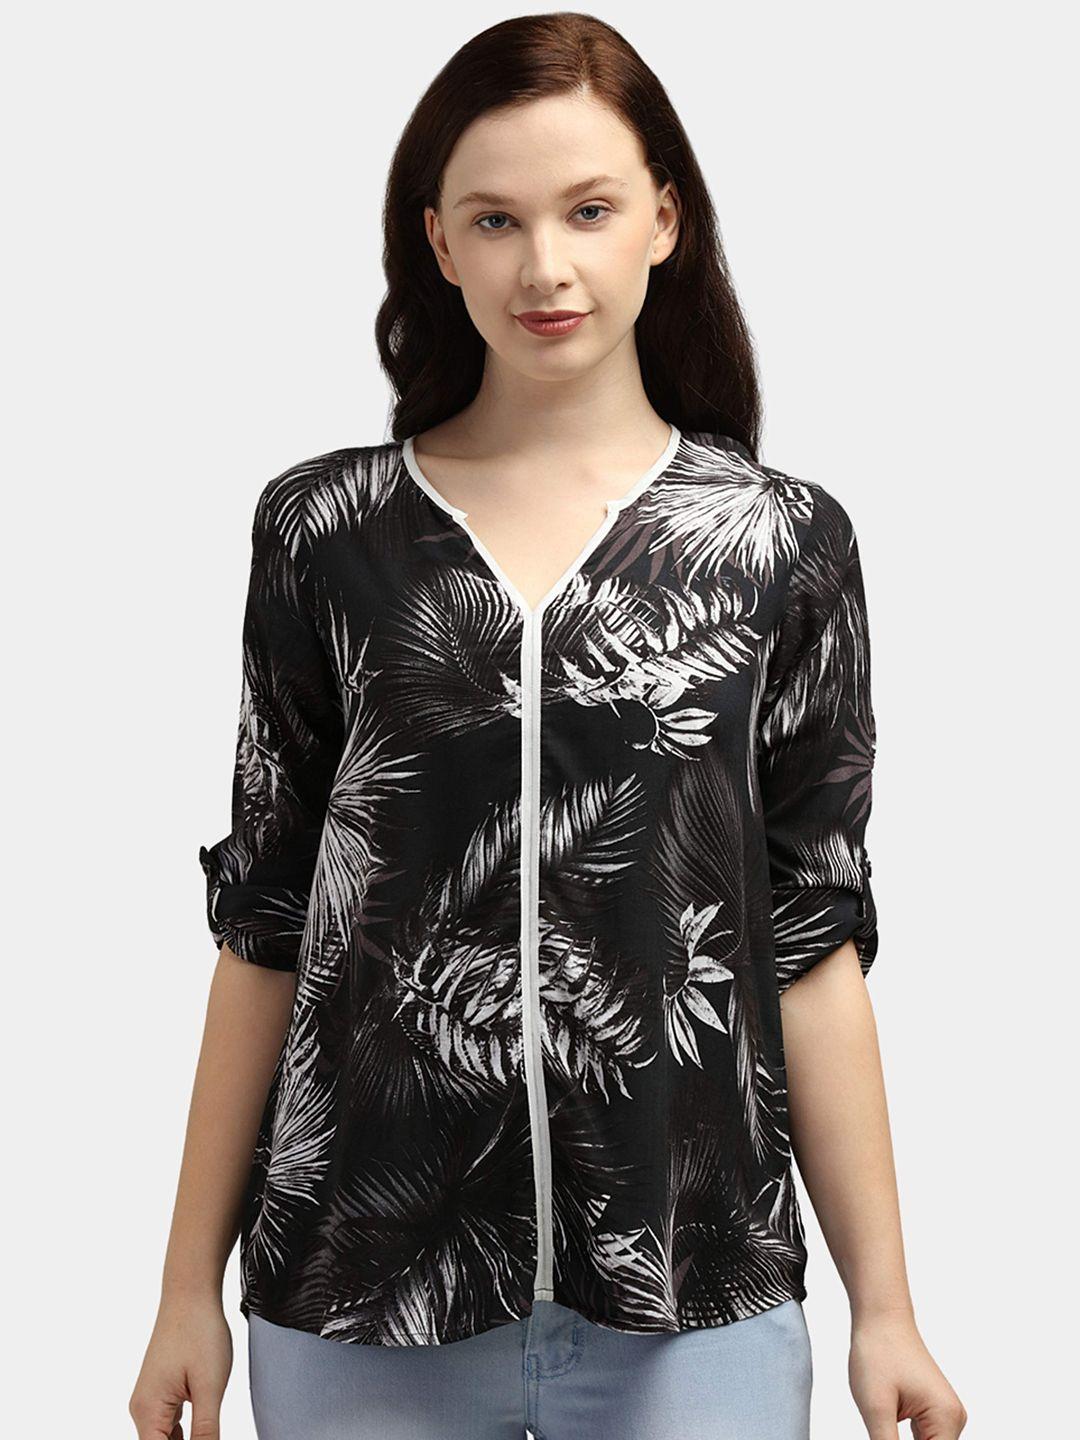 idk-black-floral-print-roll-up-sleeves-shirt-style-top